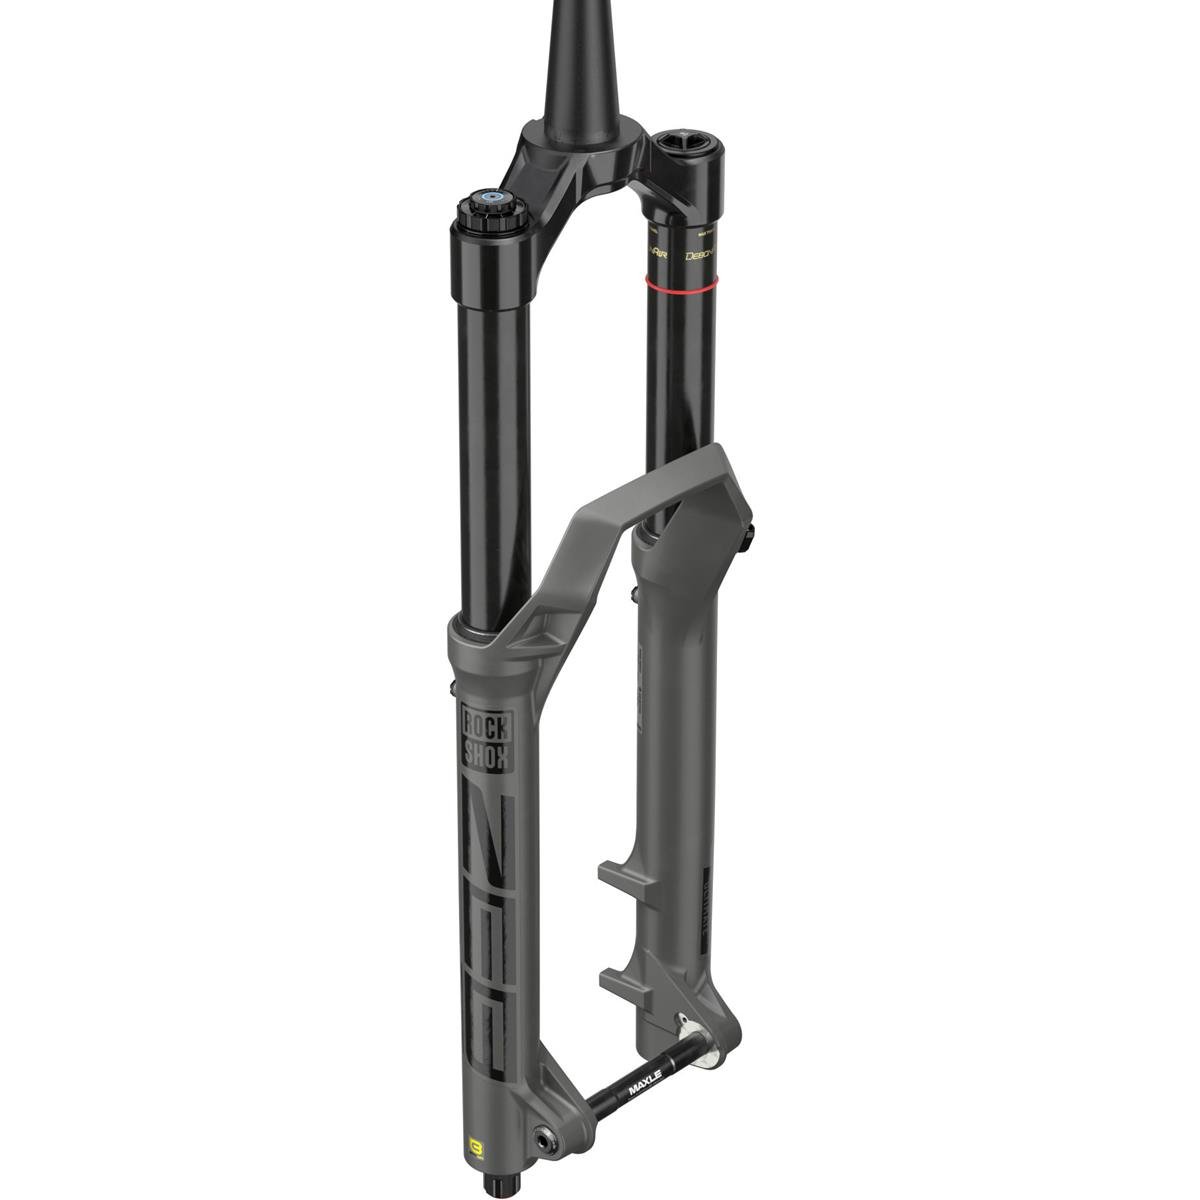 RockShox Forcella ZEB Ultimate Charger 3 RC2 27.5 Pollici, 15x110 mm, Grigio, 44 mm Offset, 160 mm - 190 mm